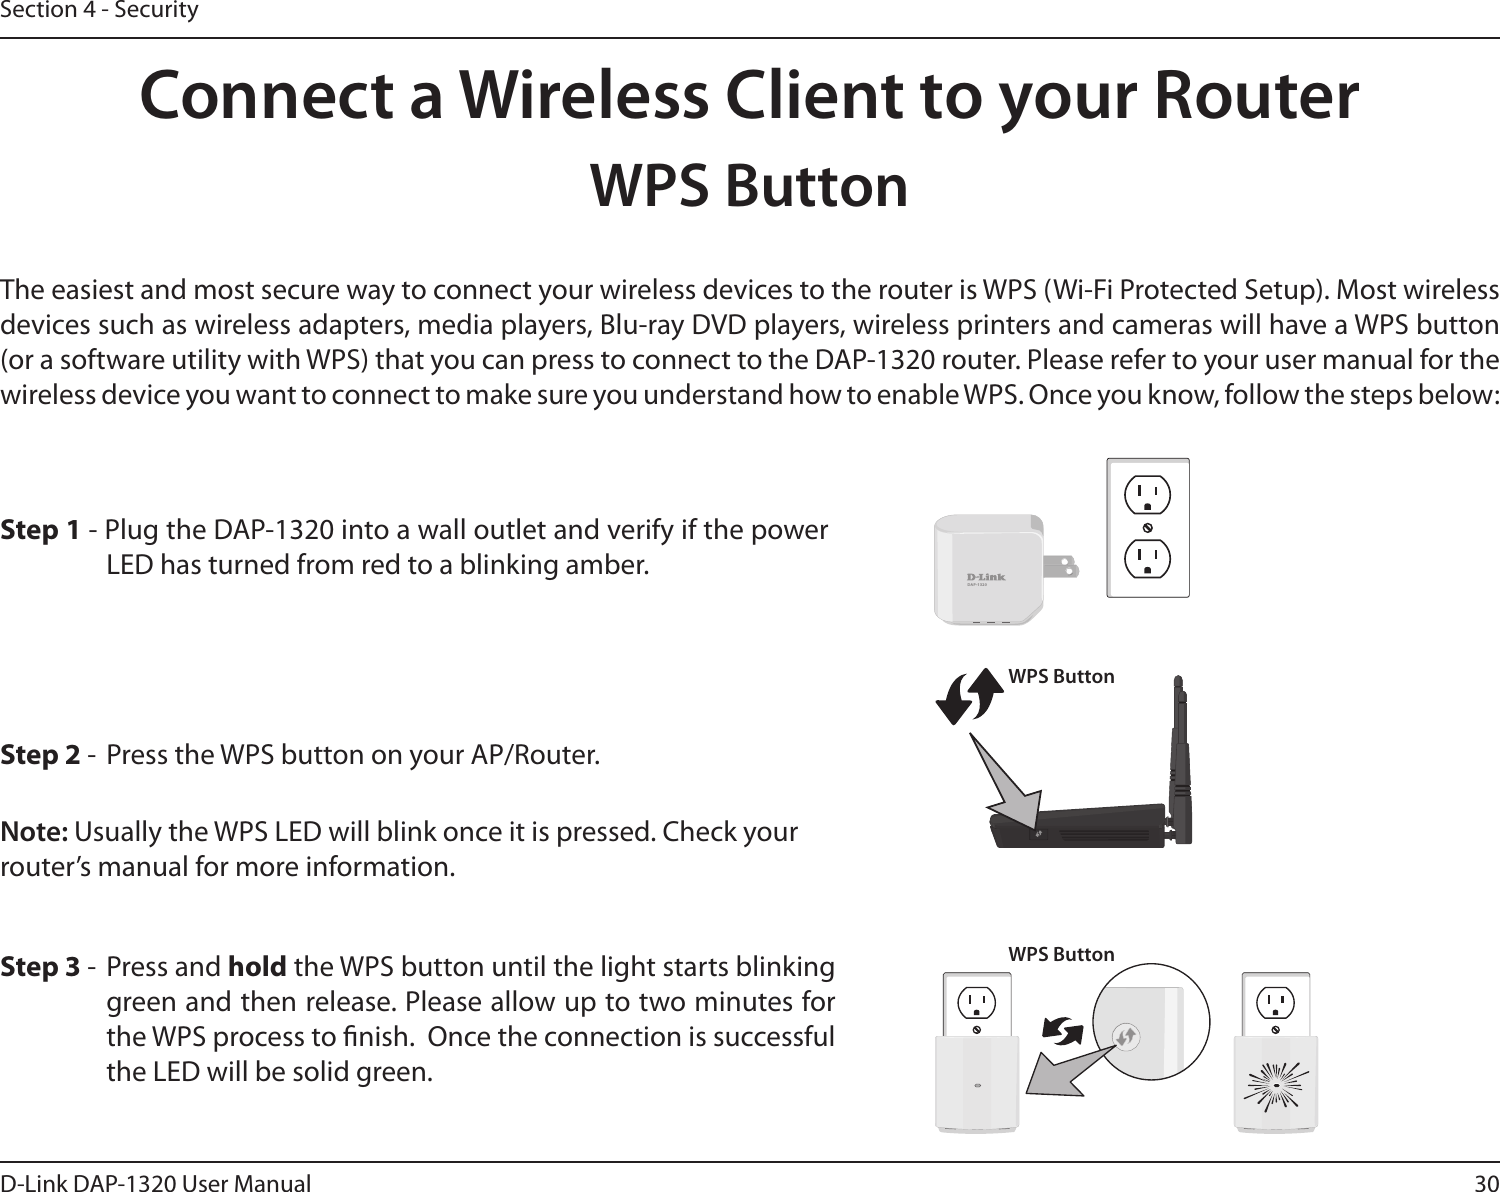 30D-Link DAP-1320 User ManualSection 4 - SecurityConnect a Wireless Client to your RouterWPS ButtonStep 2 -  Press the WPS button on your AP/Router.The easiest and most secure way to connect your wireless devices to the router is WPS (Wi-Fi Protected Setup). Most wireless devices such as wireless adapters, media players, Blu-ray DVD players, wireless printers and cameras will have a WPS button (or a software utility with WPS) that you can press to connect to the DAP-1320 router. Please refer to your user manual for the wireless device you want to connect to make sure you understand how to enable WPS. Once you know, follow the steps below:Step 1 - Plug the DAP-1320 into a wall outlet and verify if the power LED has turned from red to a blinking amber. Step 3 -  Press and hold the WPS button until the light starts blinking green and then release. Please allow up to two minutes for the WPS process to nish.  Once the connection is successful the LED will be solid green. DAP-1320WPS ButtonWPS ButtonNote: Usually the WPS LED will blink once it is pressed. Check your router’s manual for more information. 